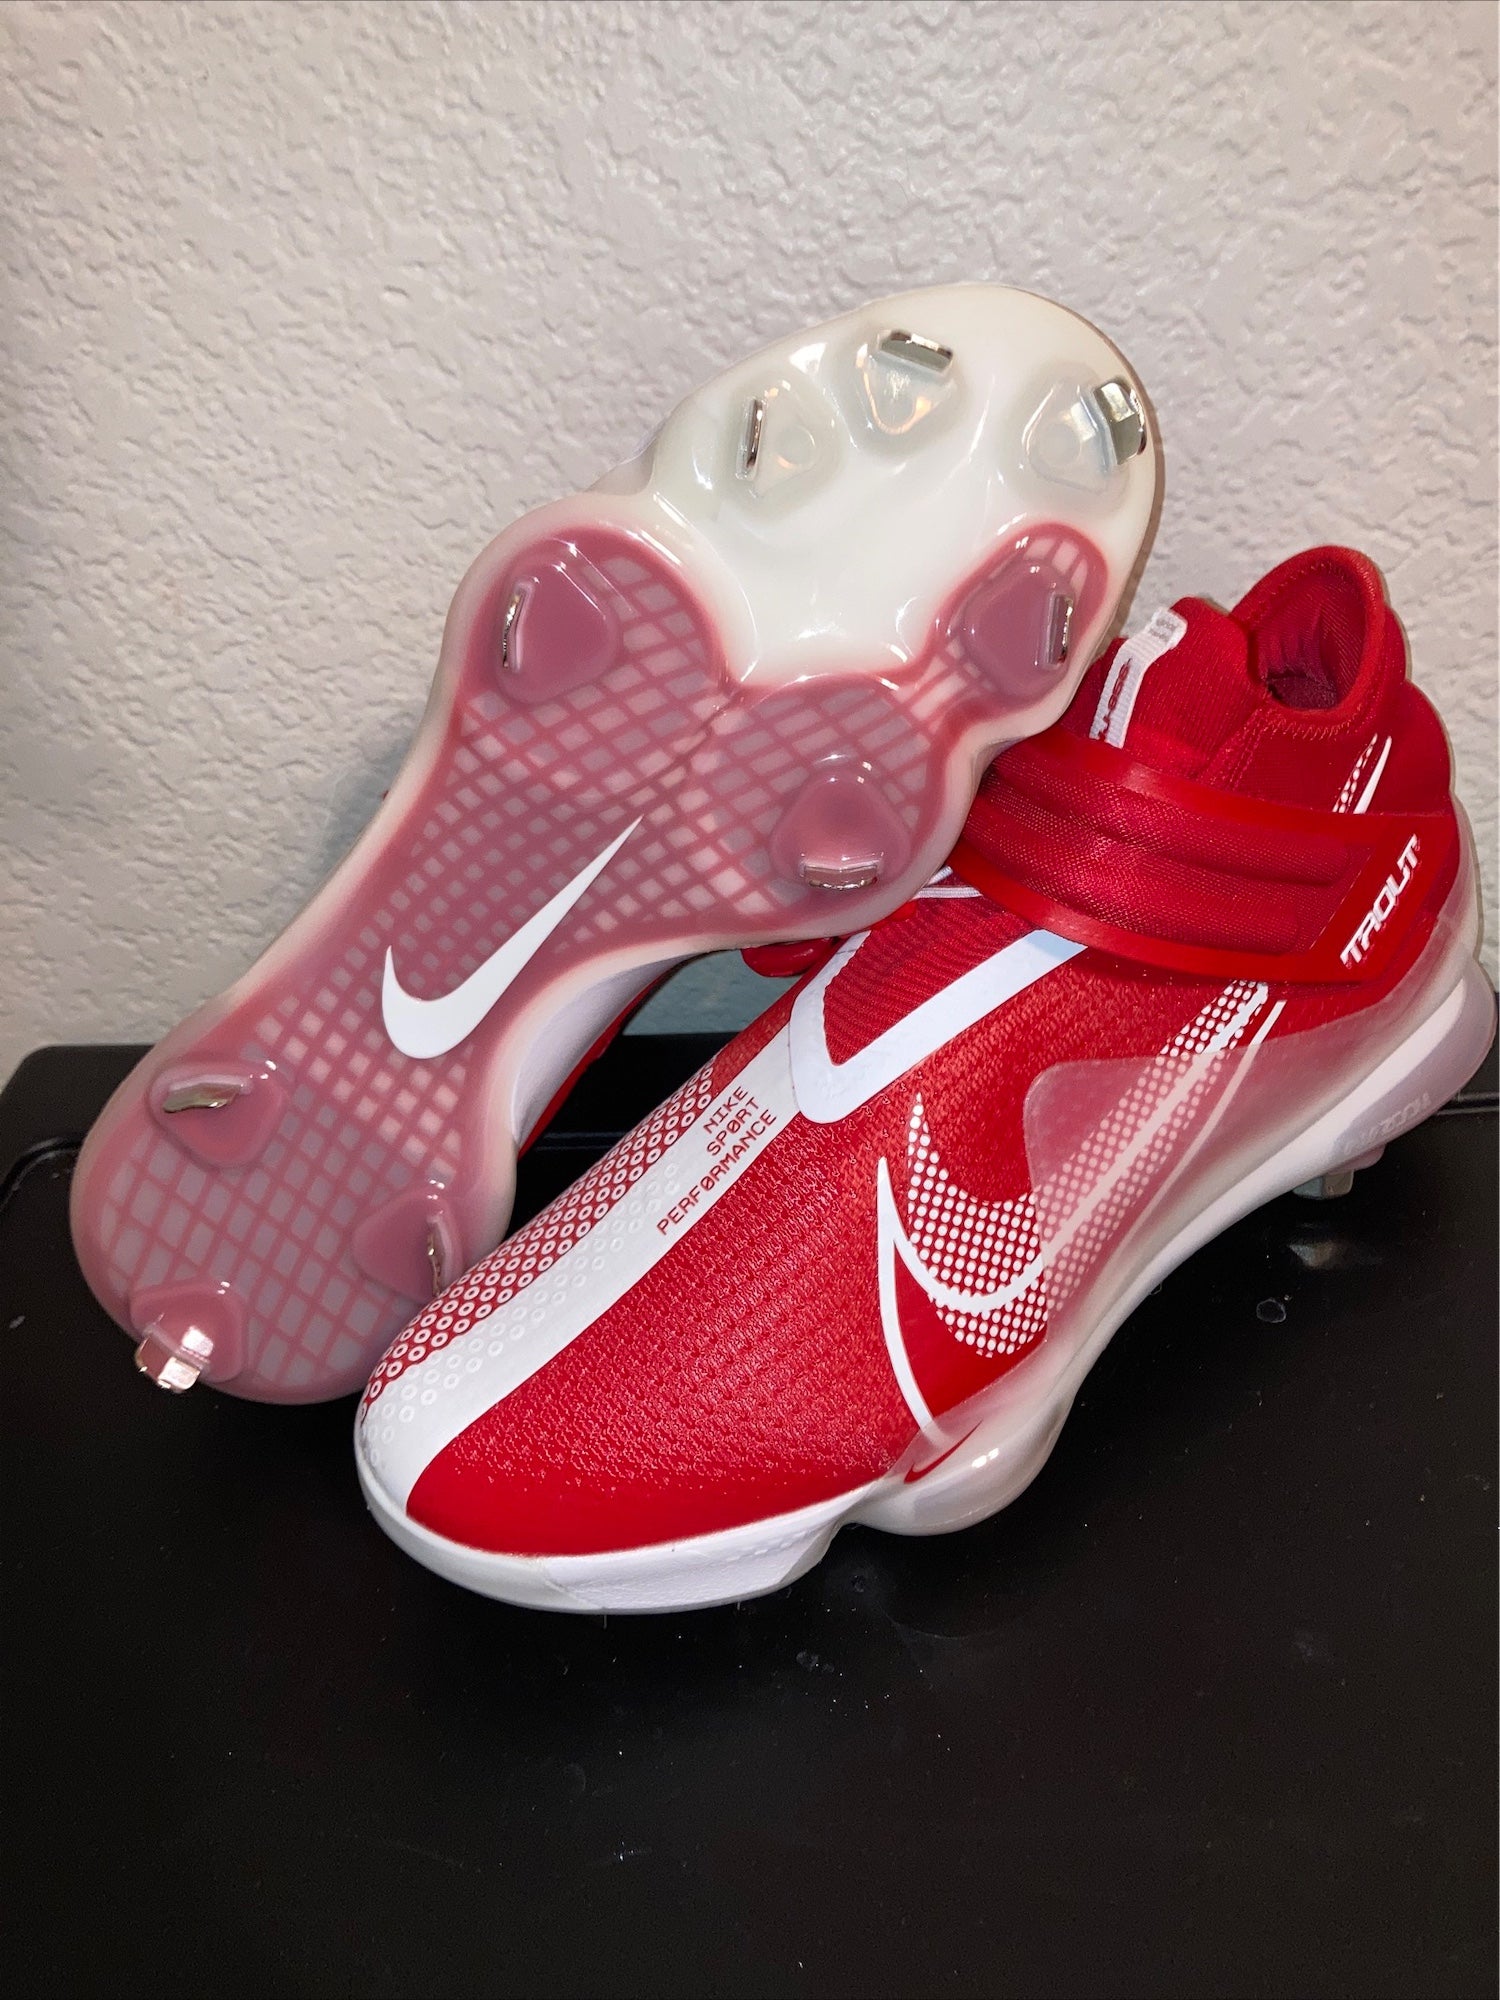 Nike Force Zoom Trout 7 Baseball Cleats Red CI3134-602 Men's Size 9.5